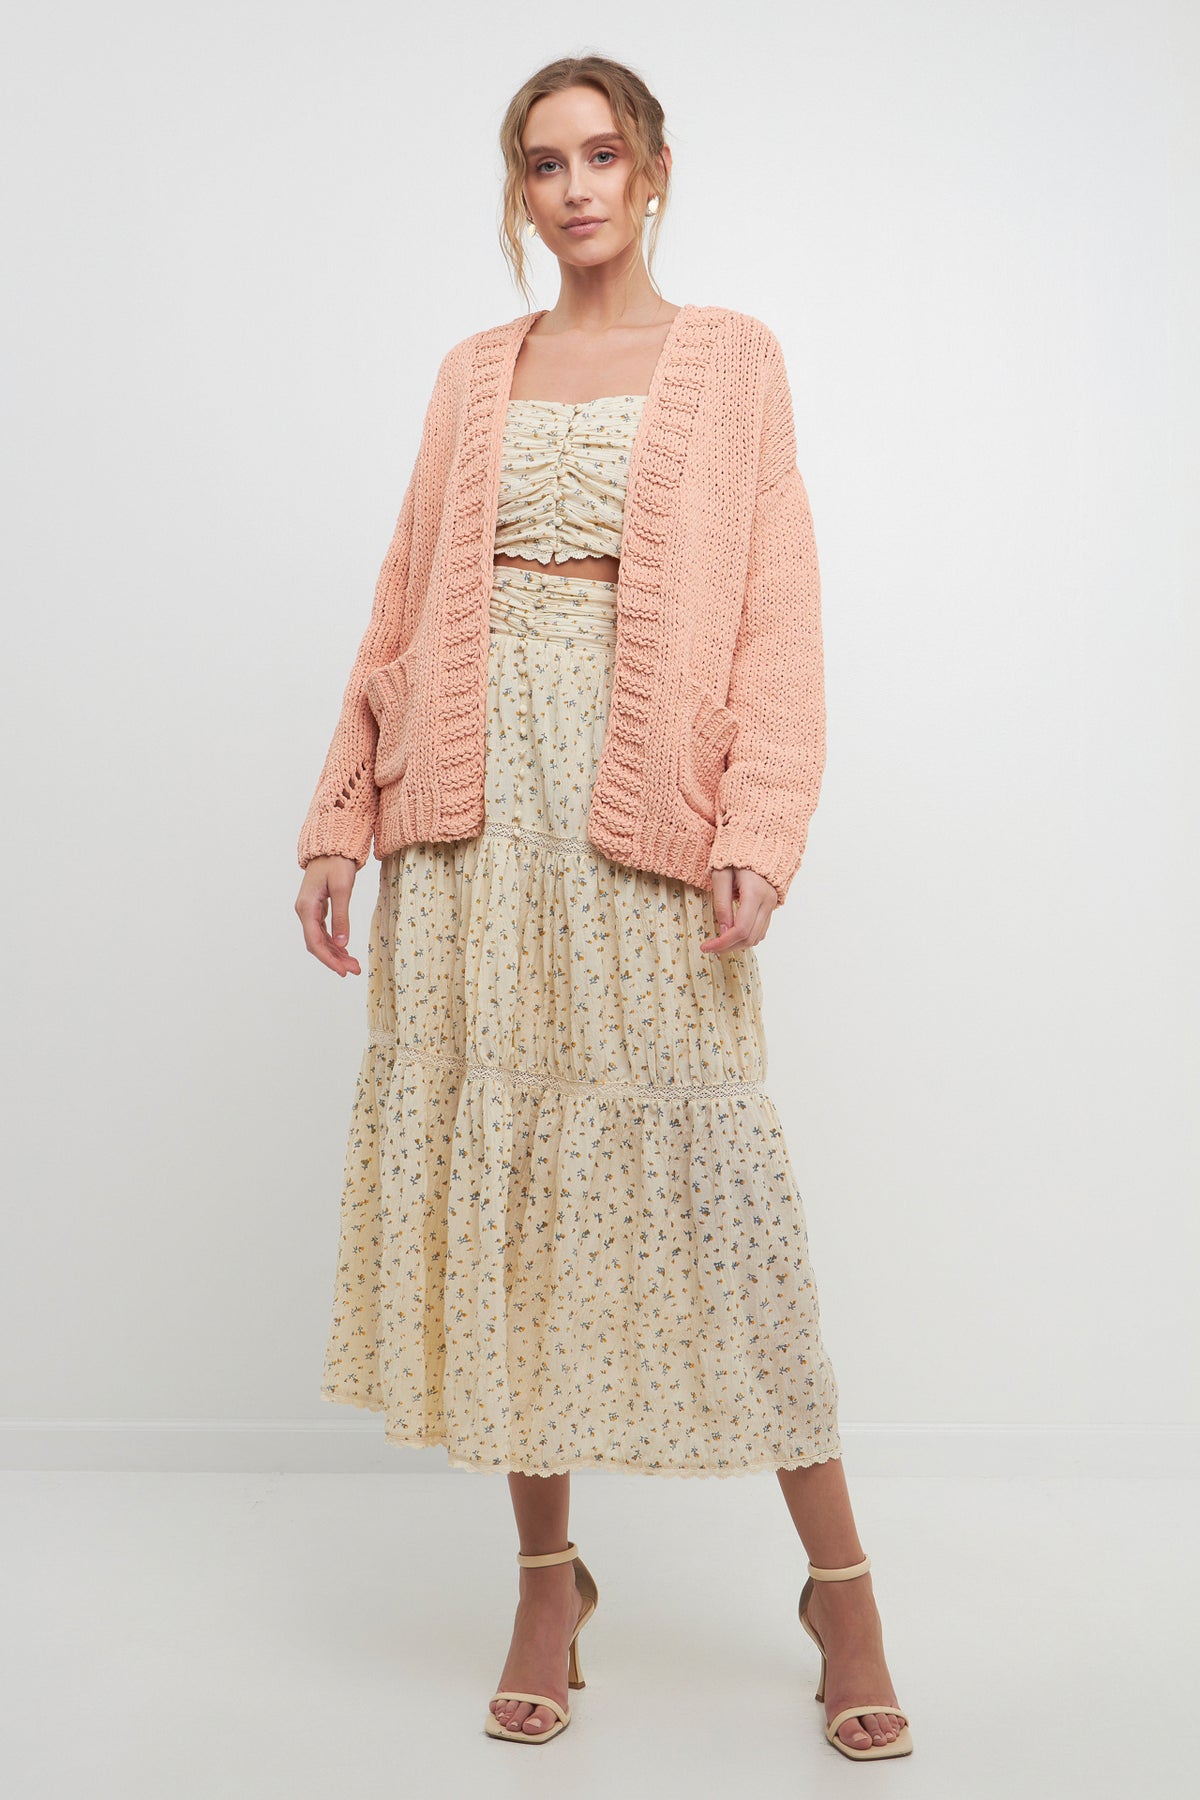 FREE THE ROSES - Oversized Chunky Cardigan - JACKETS available at Objectrare